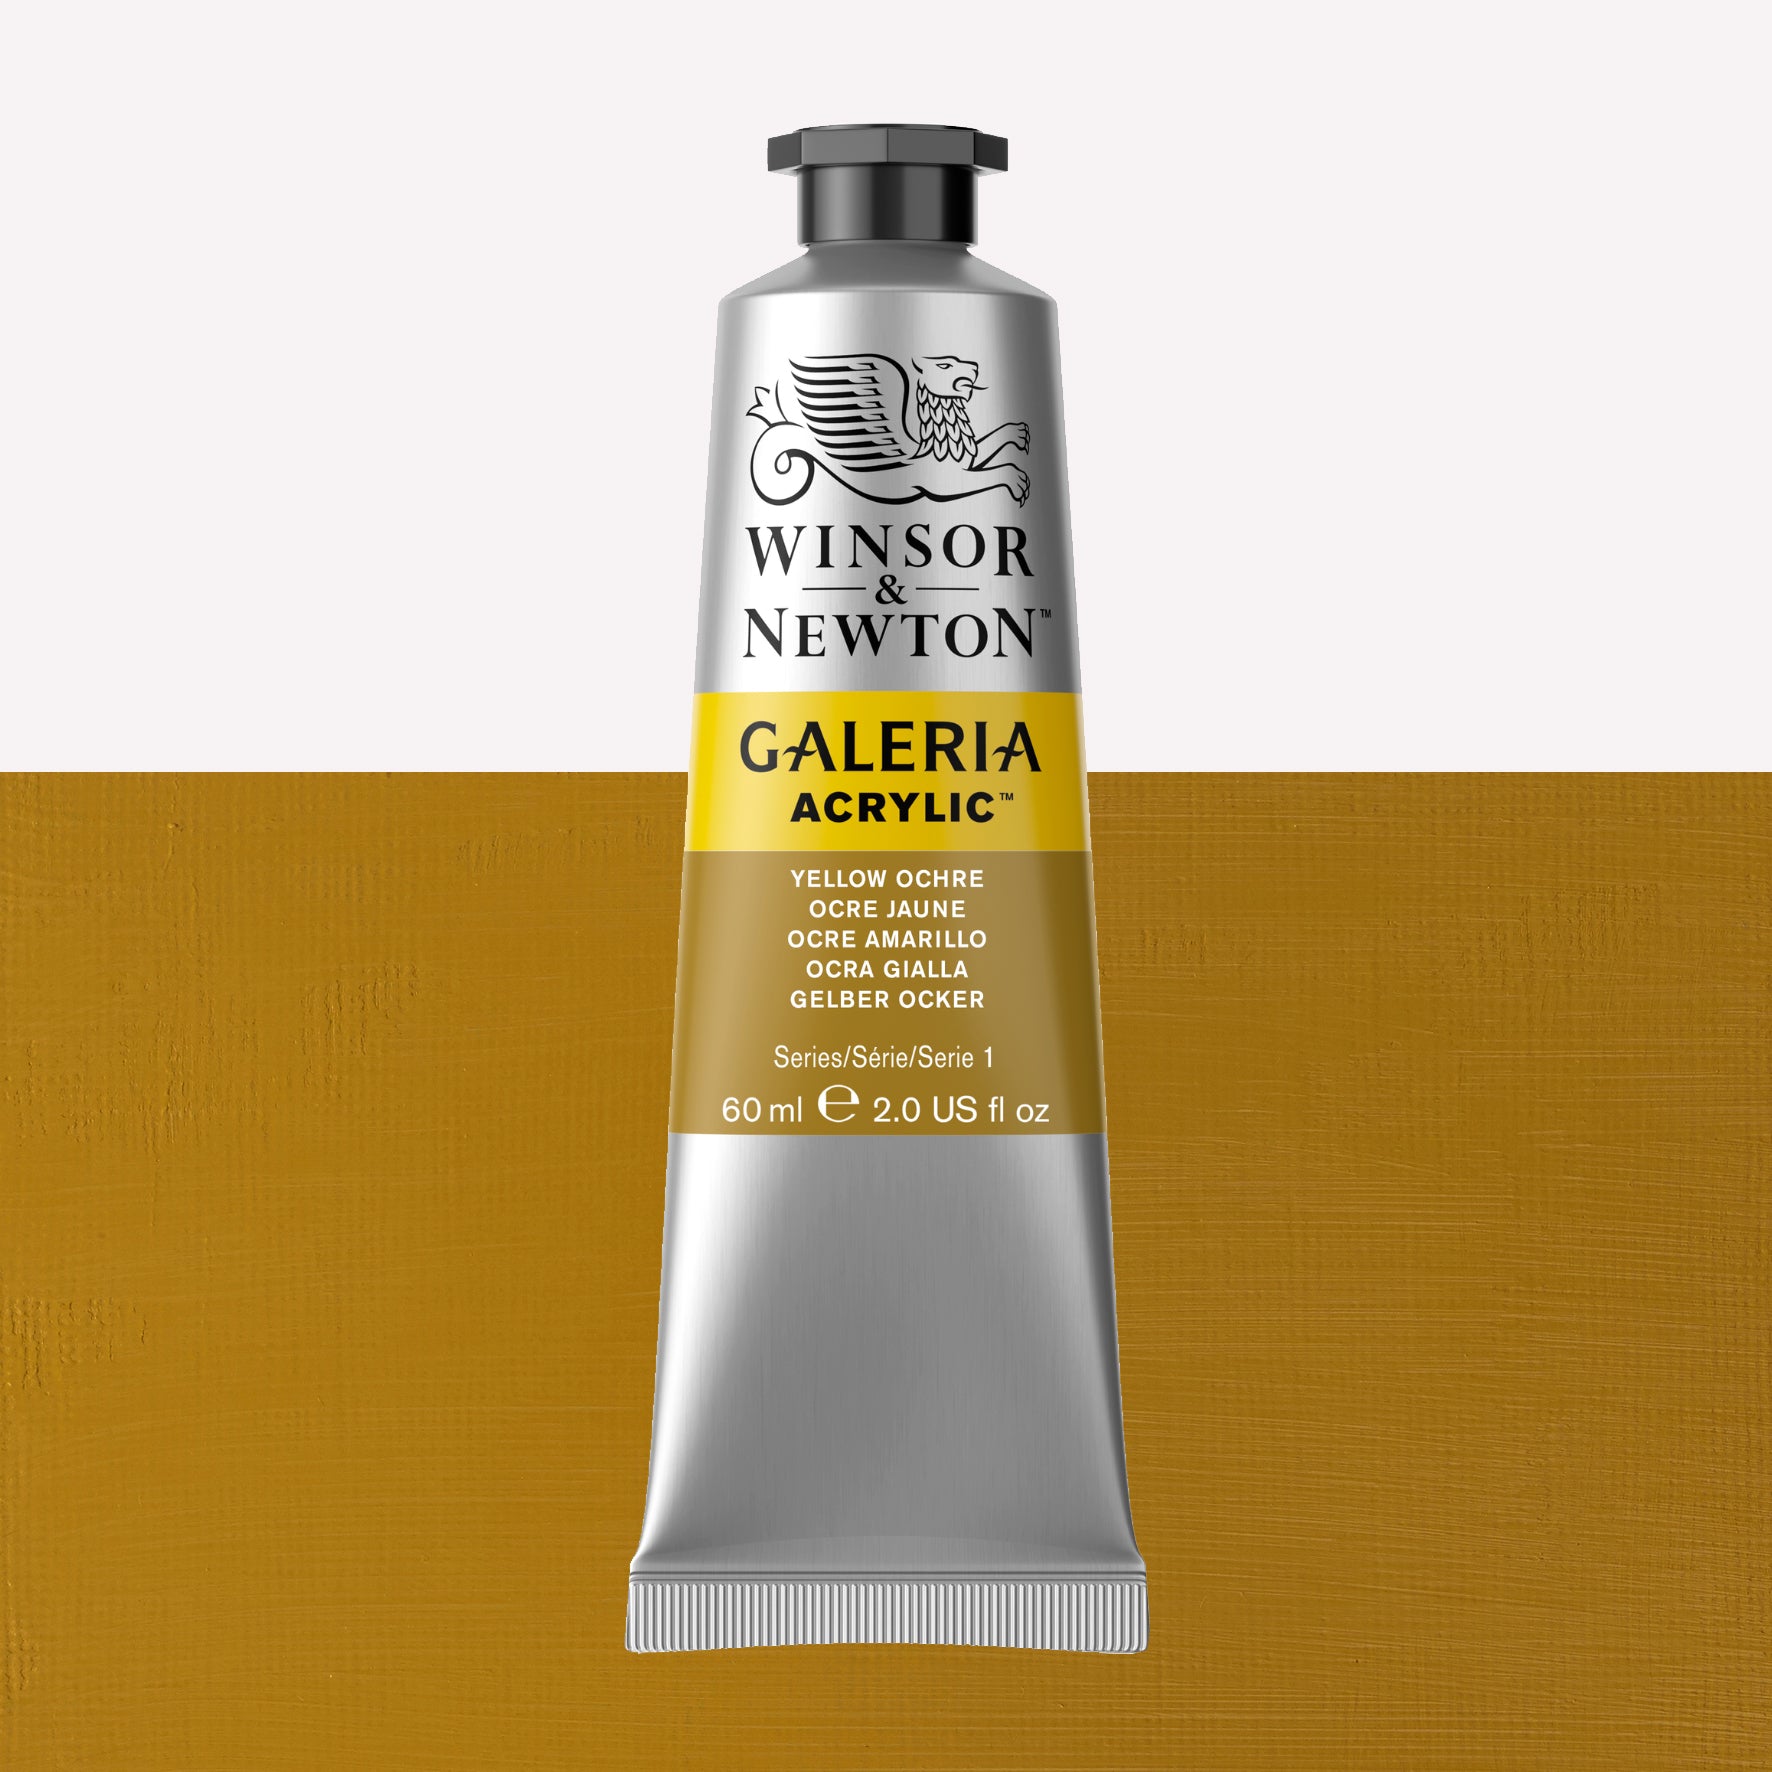 A 60ml tube of vibrant Galeria Acrylic paint in the shade Yellow Ochre. This professional-quality paint is packaged in a silver tube with a black lid. Made by Winsor and Newton.